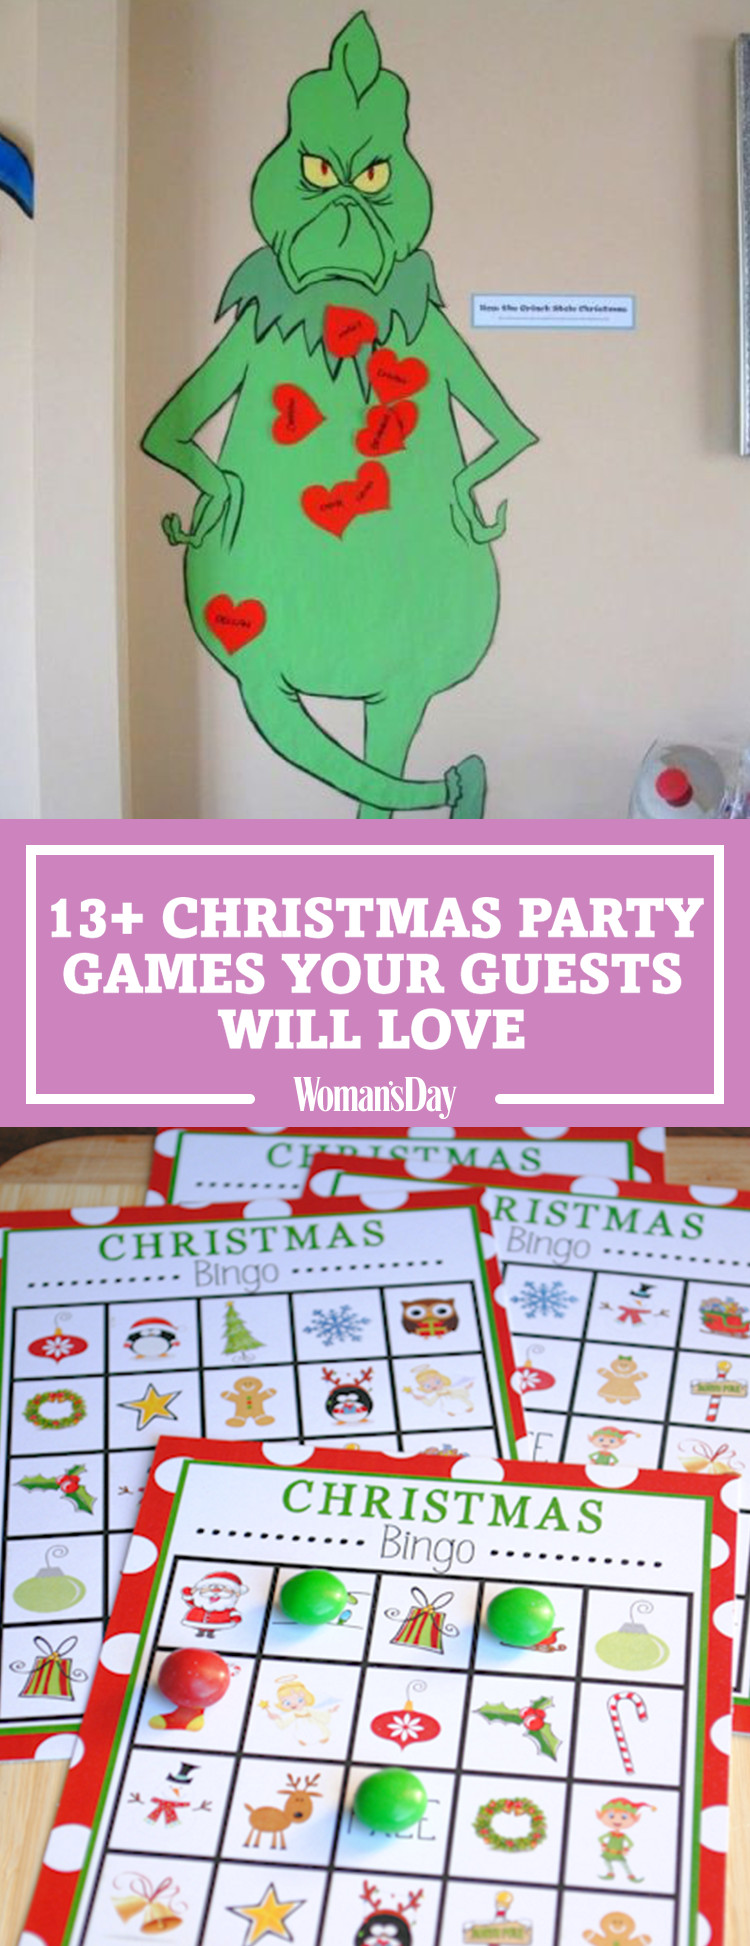 Holiday Office Party Game Ideas
 17 Fun Christmas Party Games for Kids DIY Holiday Party